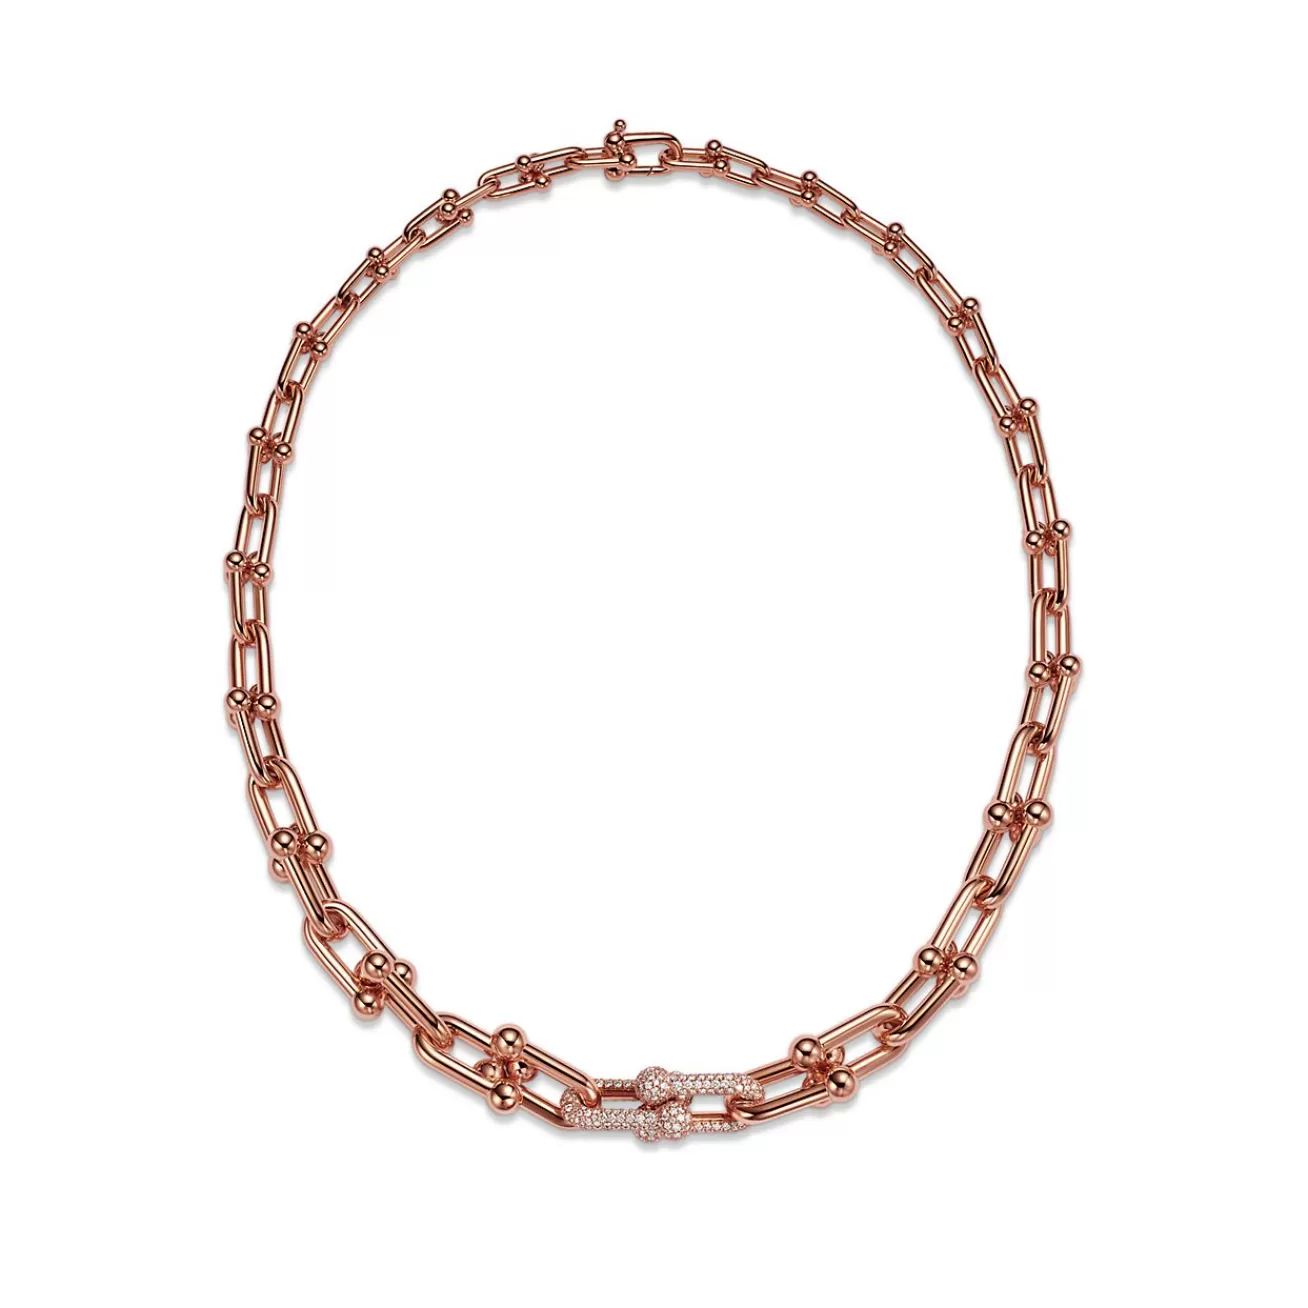 Tiffany & Co. Tiffany HardWear Graduated Link Necklace in Rose Gold with Pavé Diamonds | ^ Necklaces & Pendants | Men's Jewelry